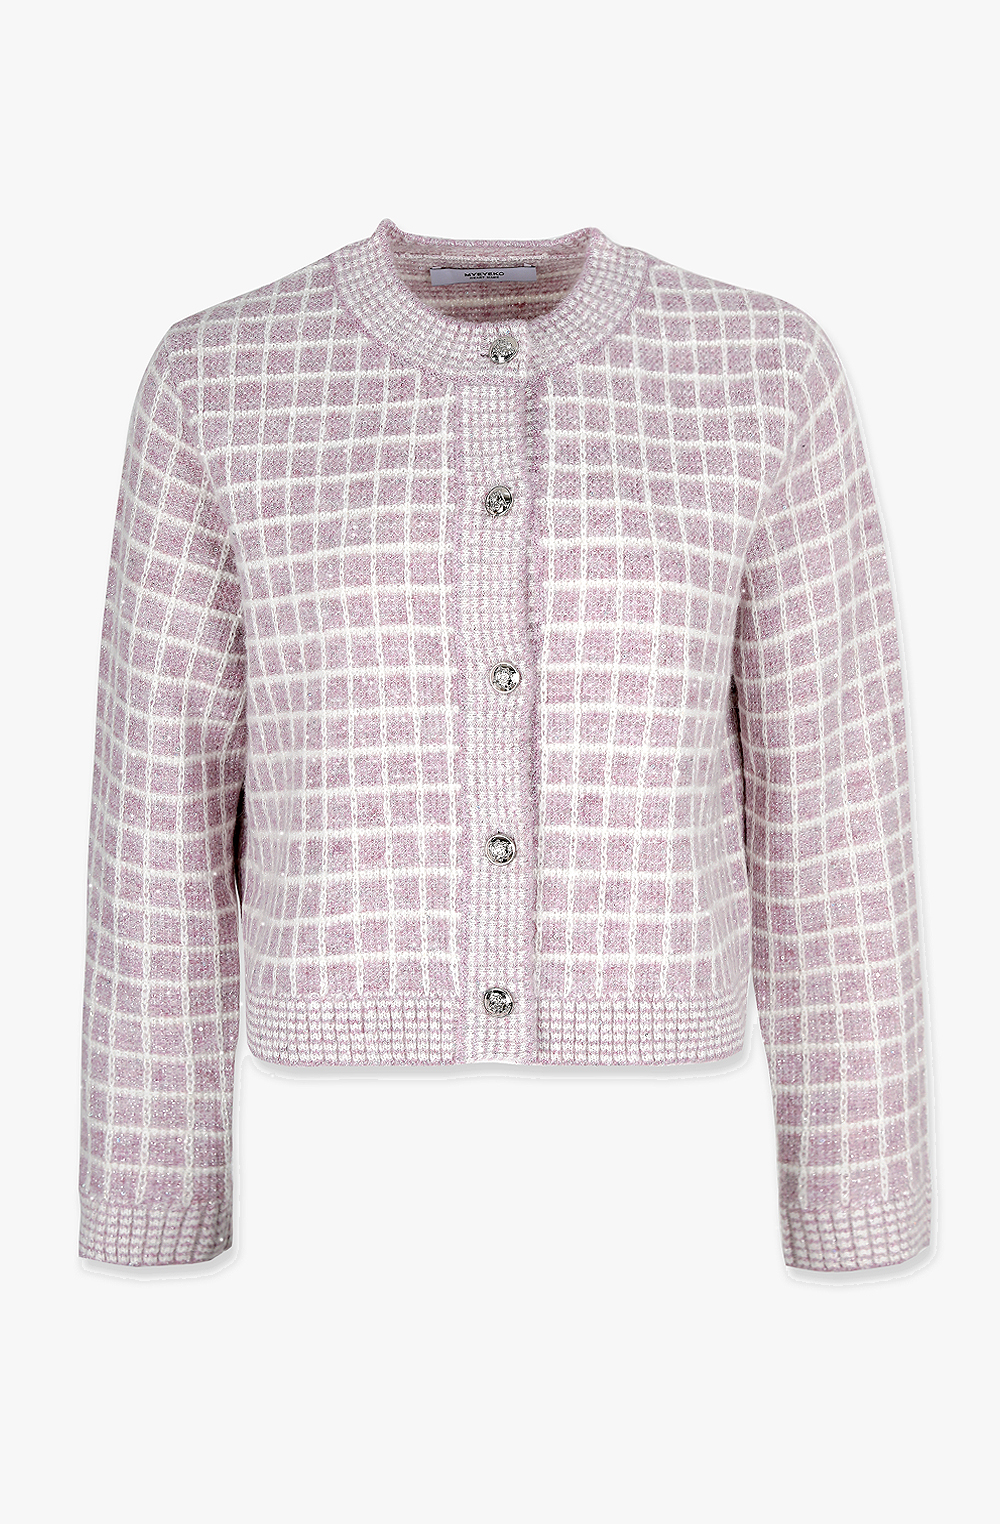 HIGH QUALITY LINE - MYEYEKO 23 EARLY SPRING / BARRIE SEQUIN TWEED KNIT CARDIGAN (LAVENDER PINK)